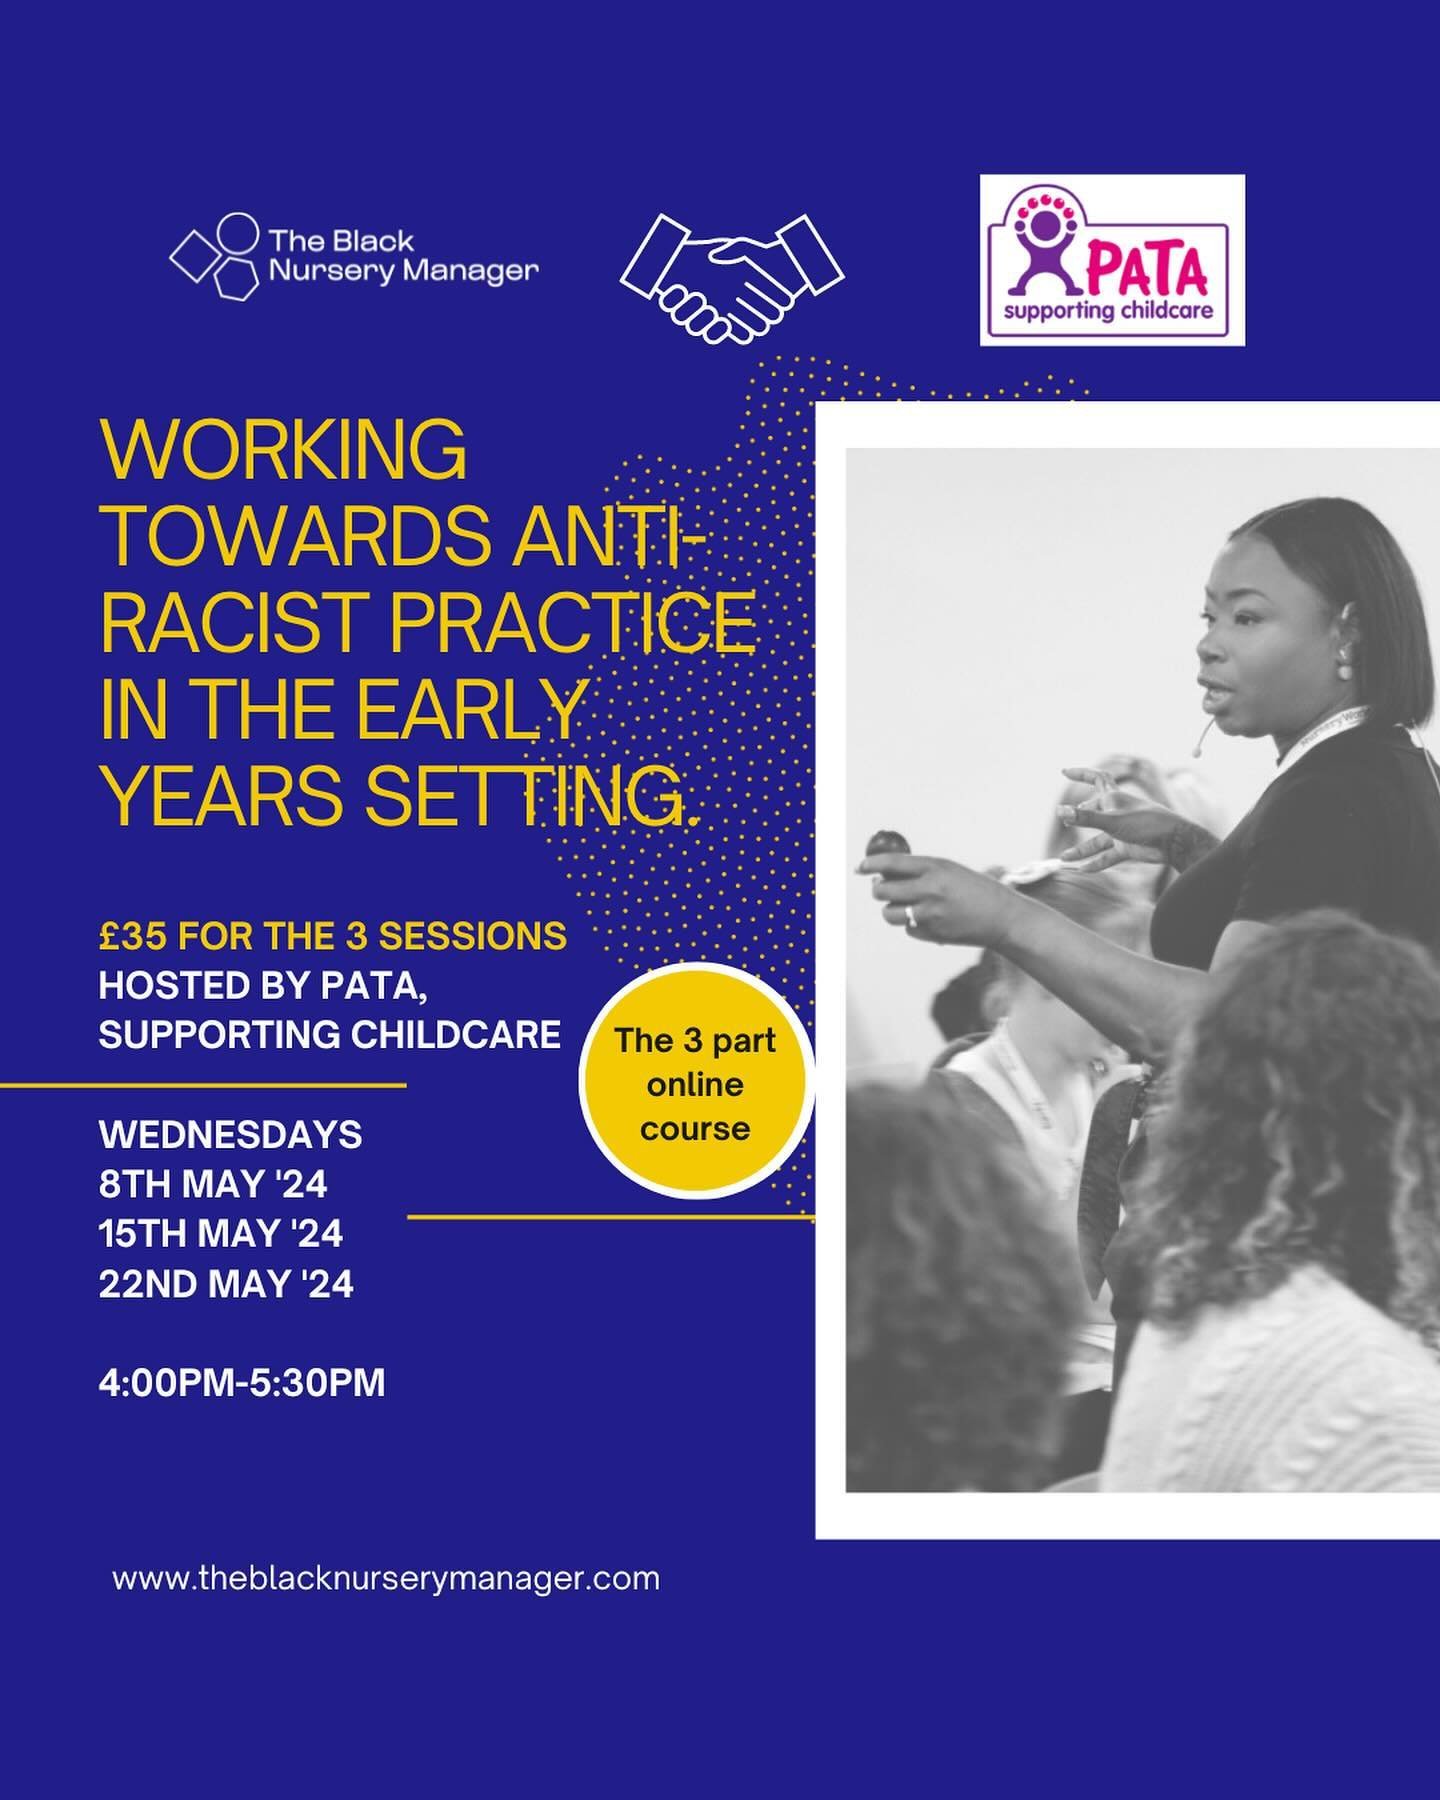 After the success of delivering my 3 part webinar course: Working Towards Anti-Racist Practice in the Early Years Setting in 2022,  I&rsquo;ve been invited back to deliver it again, online, for a fourth time by the fabulous organisation PATA on:

8th